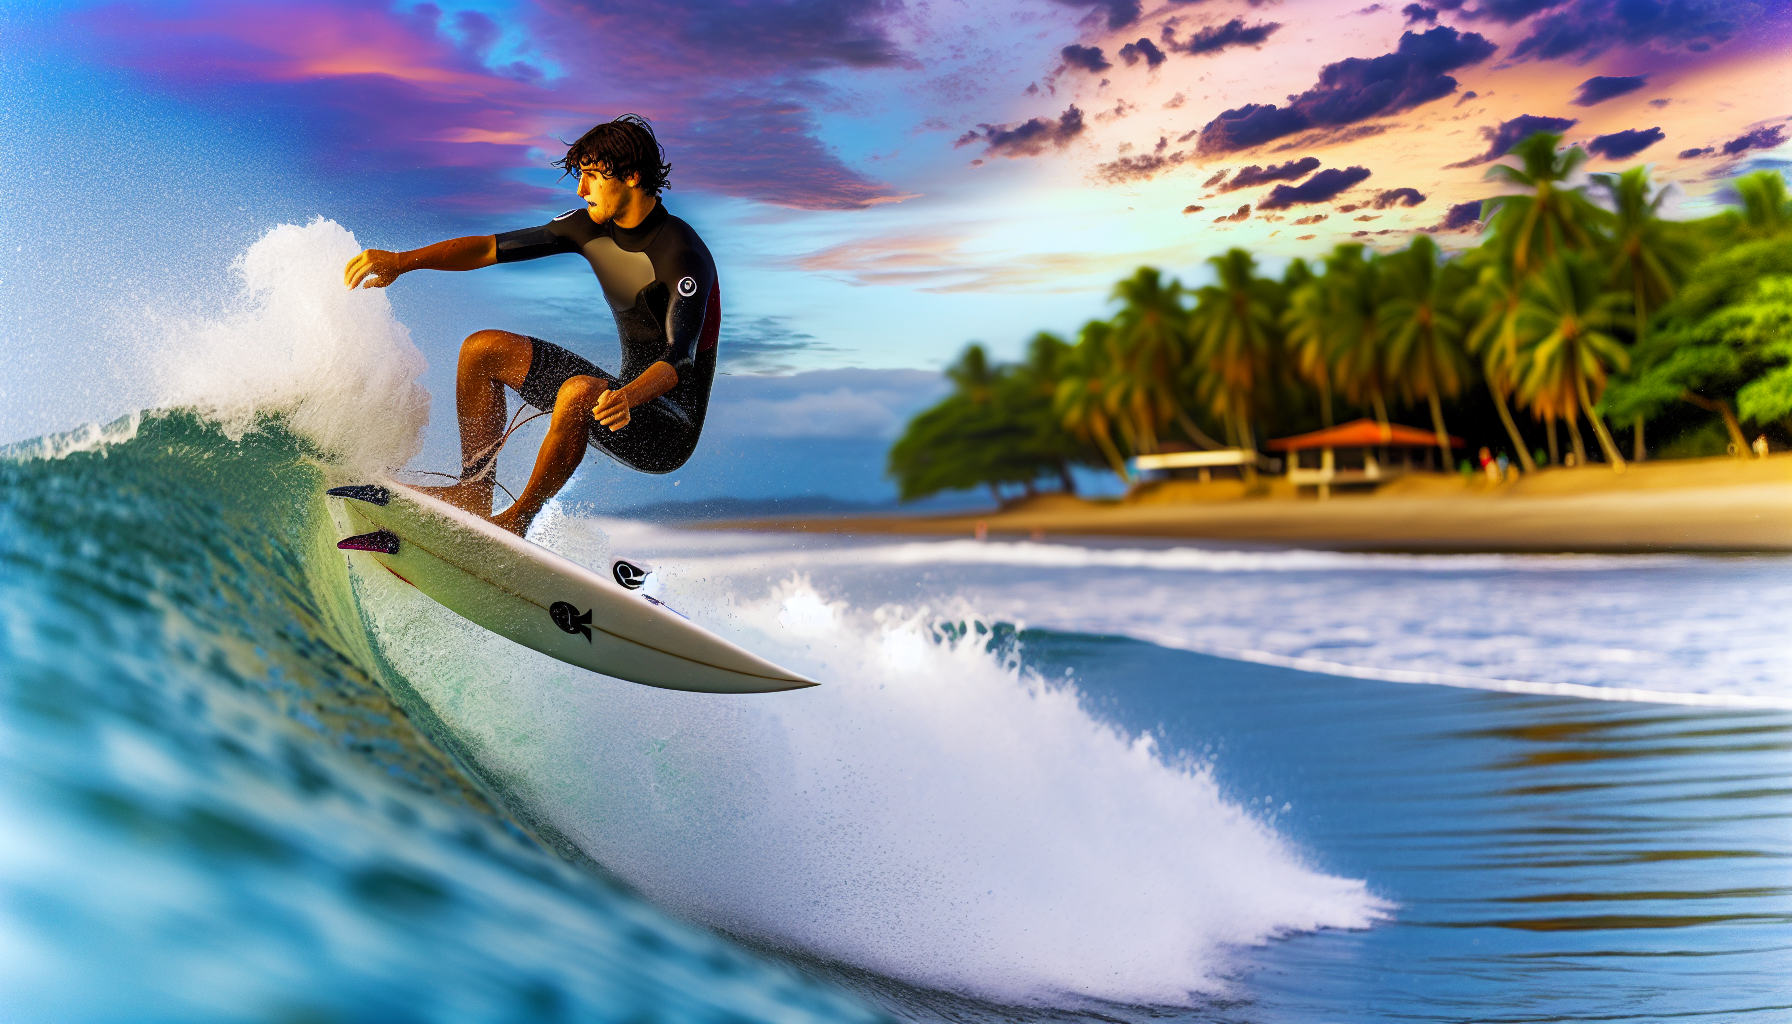 Surfer catching a wave on the vibrant Caribbean coast of Costa Rica